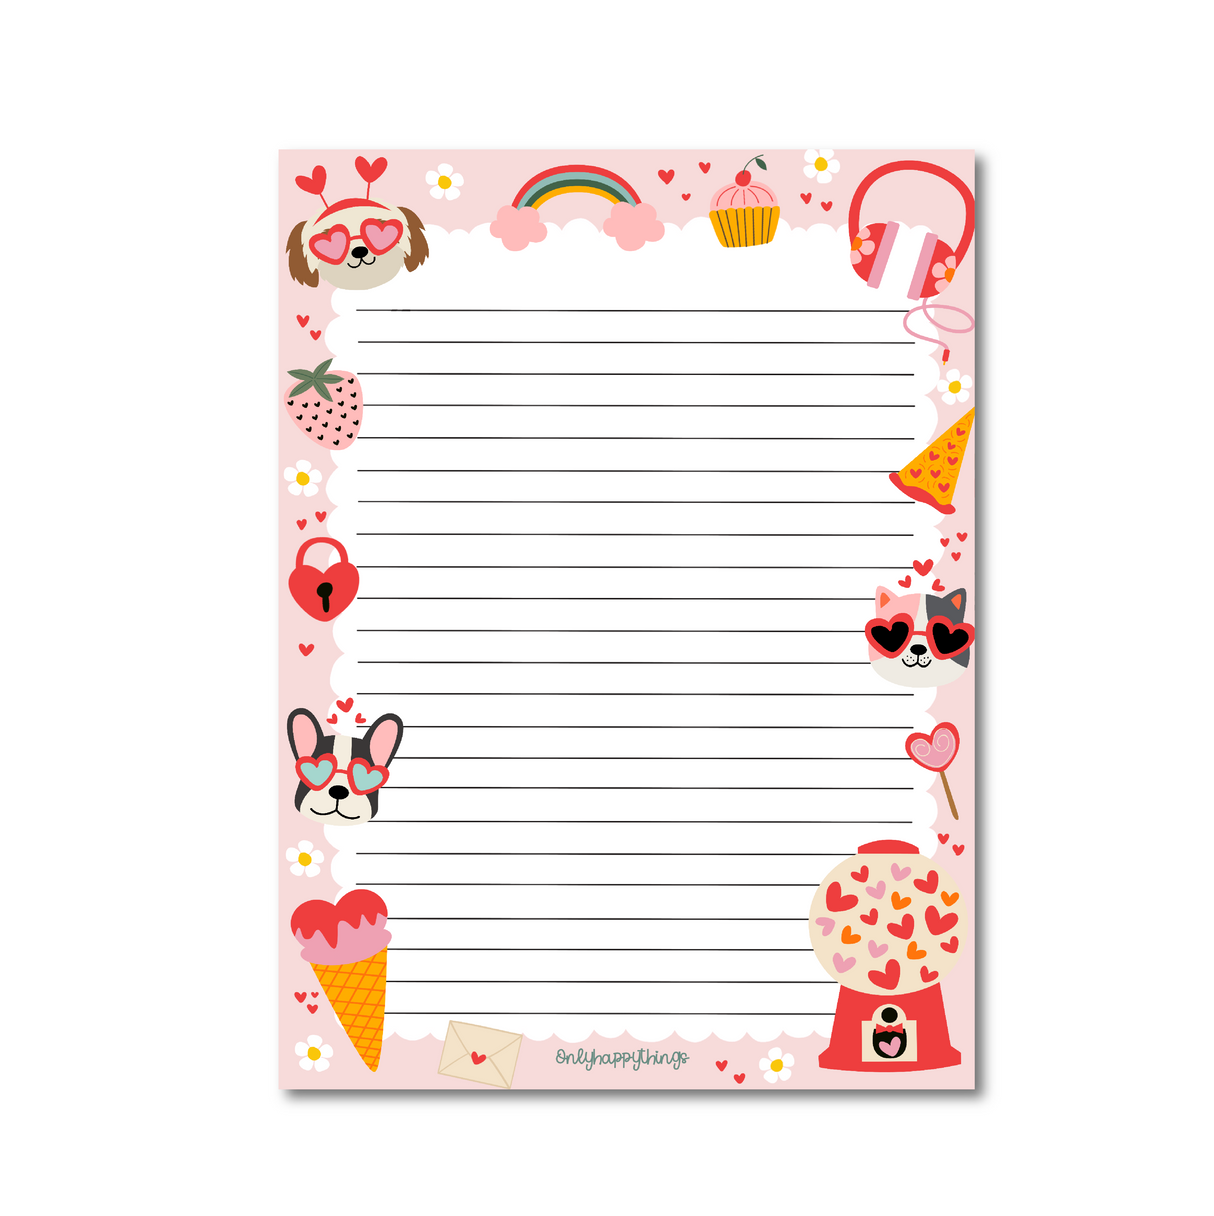 Pawsome Love A5 Notepad border of dogs and cats with heart eye glasses, heart lockets, flowers, rainbows, cupcakes, pizza, gumball machine, ice-cream cone and heart lollipop